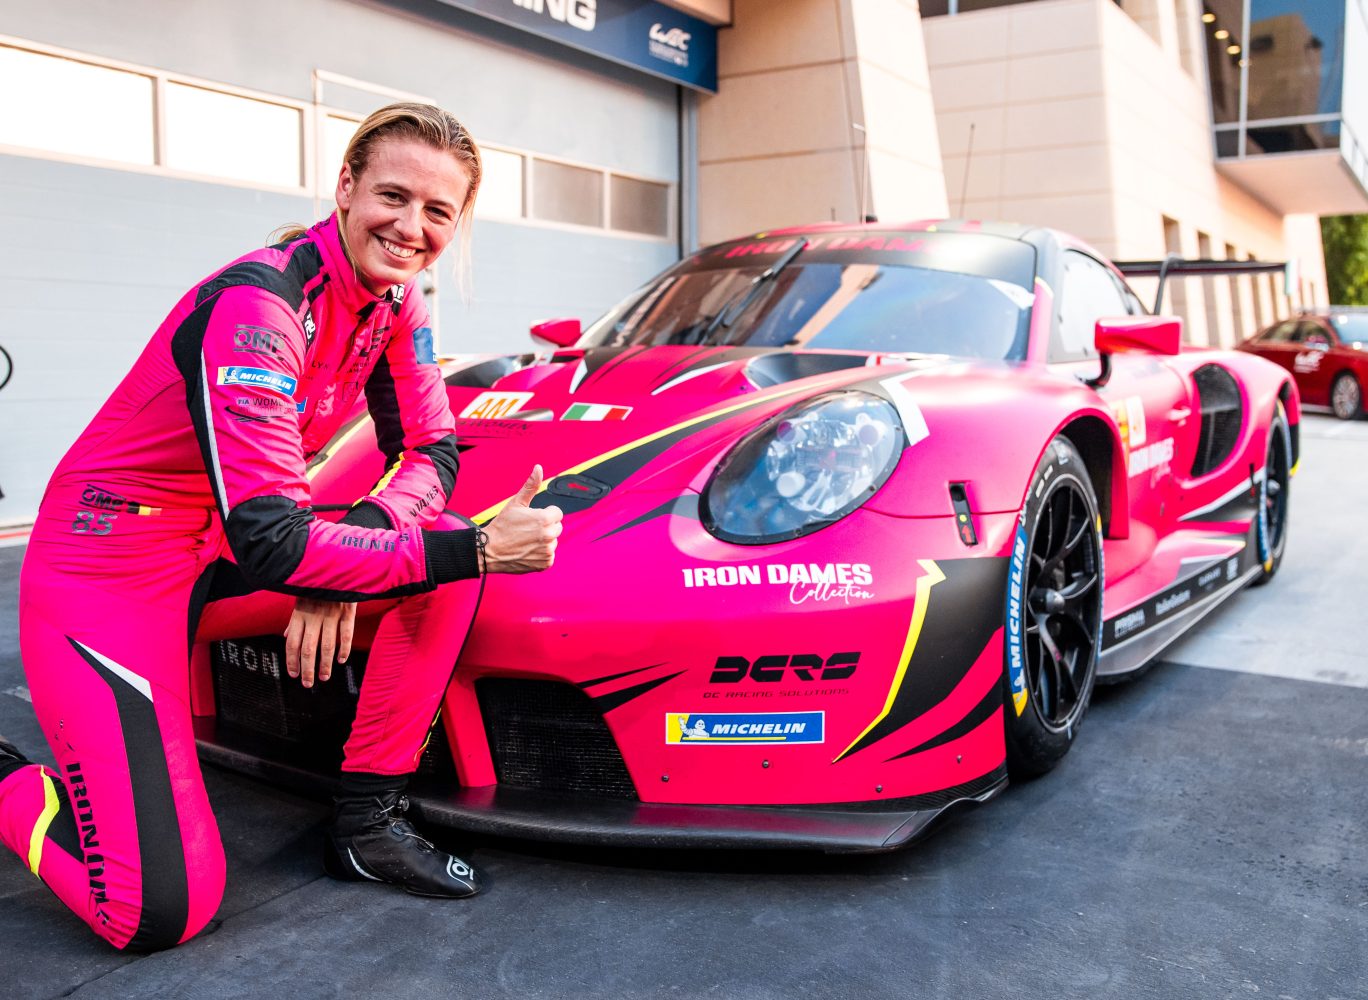 SARAH BOVY SECURES POLE POSITION FOR IRON DAMES IN FIA WEC SEASON FINALE - 8 HOURS OF BAHRAIN